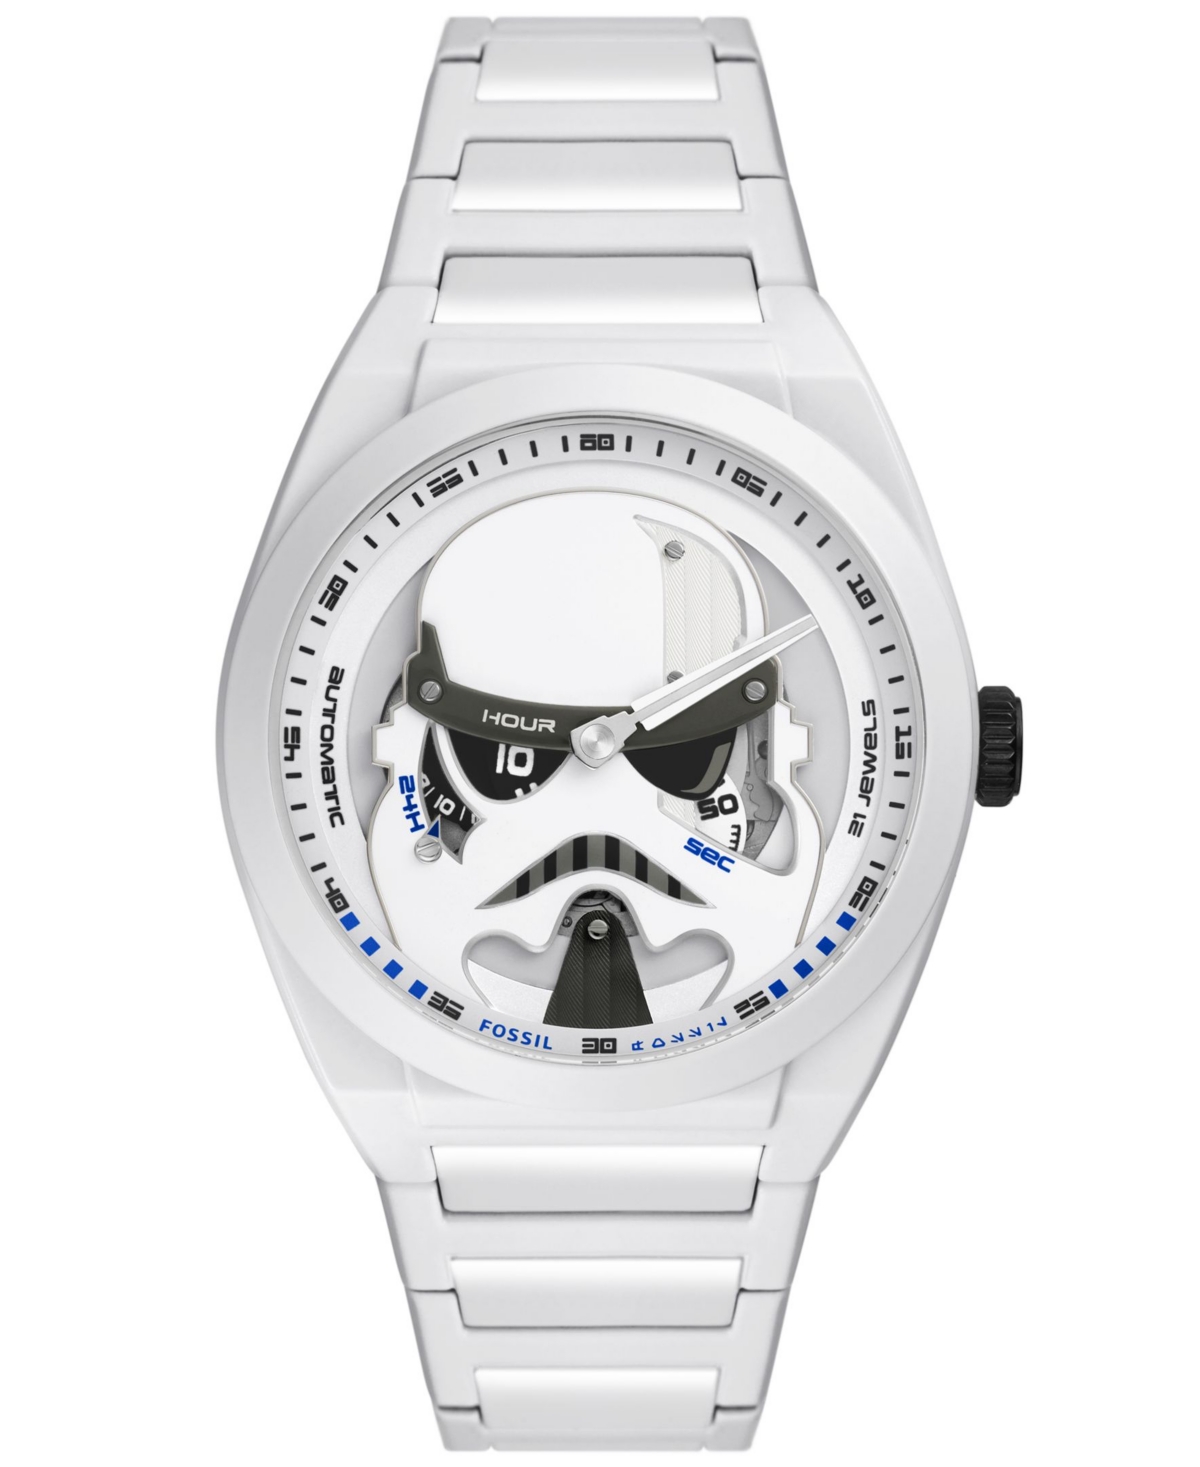 Fossil Unisex Limited Edition Star Wars Stormtrooper Automatic White Stainless Steel Watch 43mm